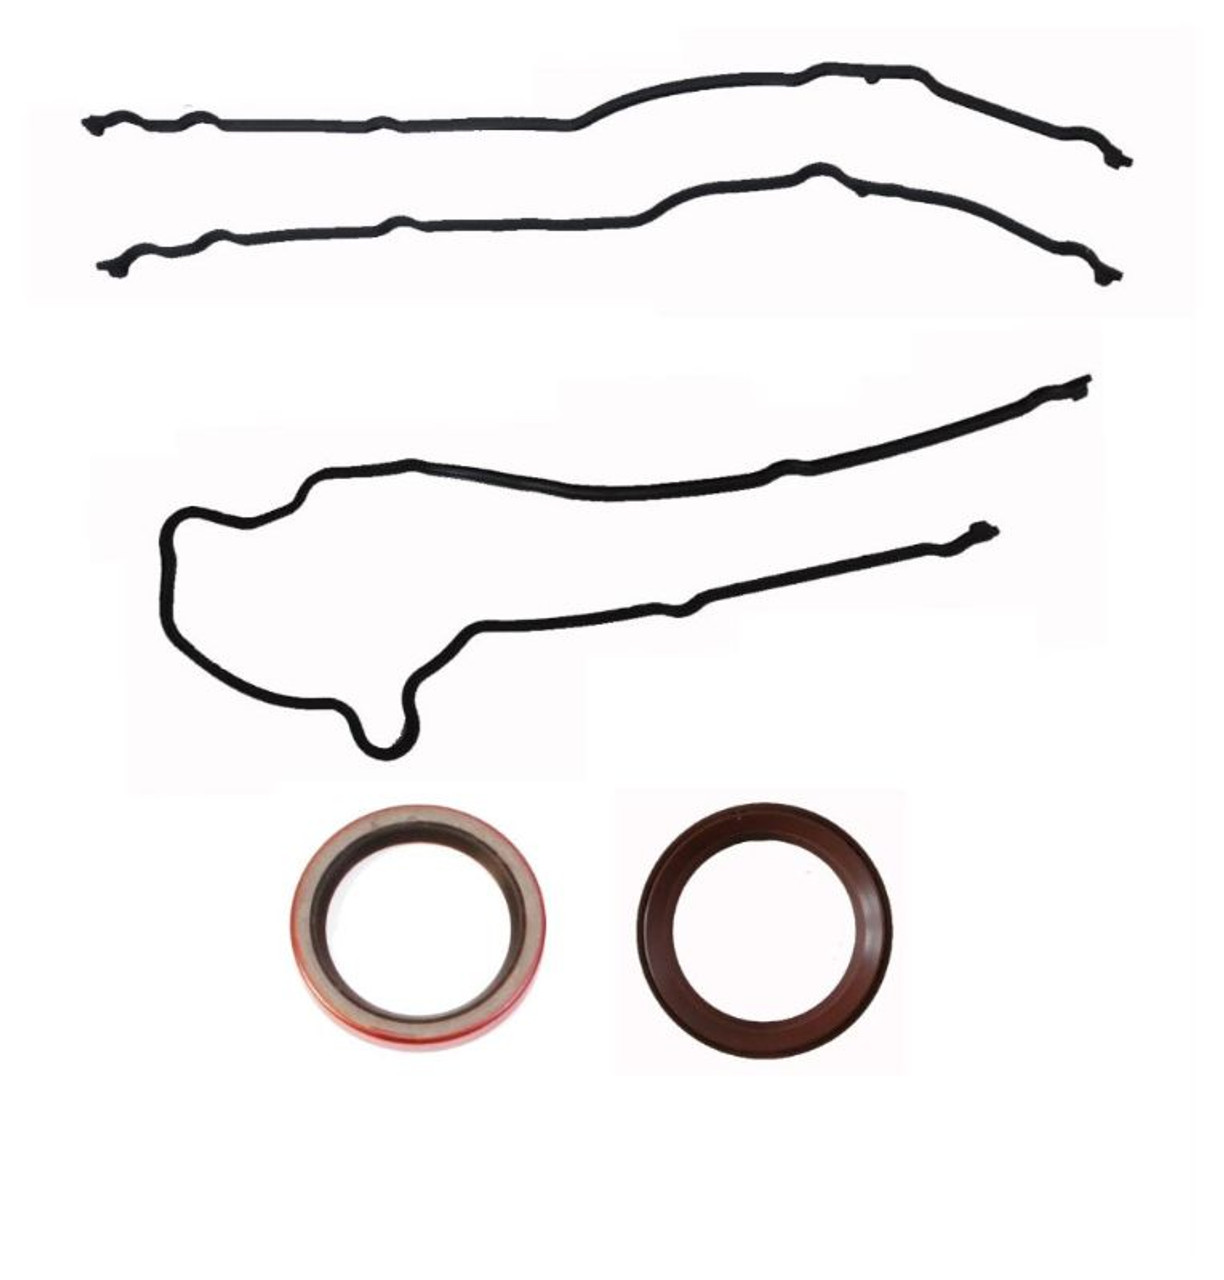 2003 Ford Excursion 5.4L Engine Timing Cover Gasket Set TCF330-A -156